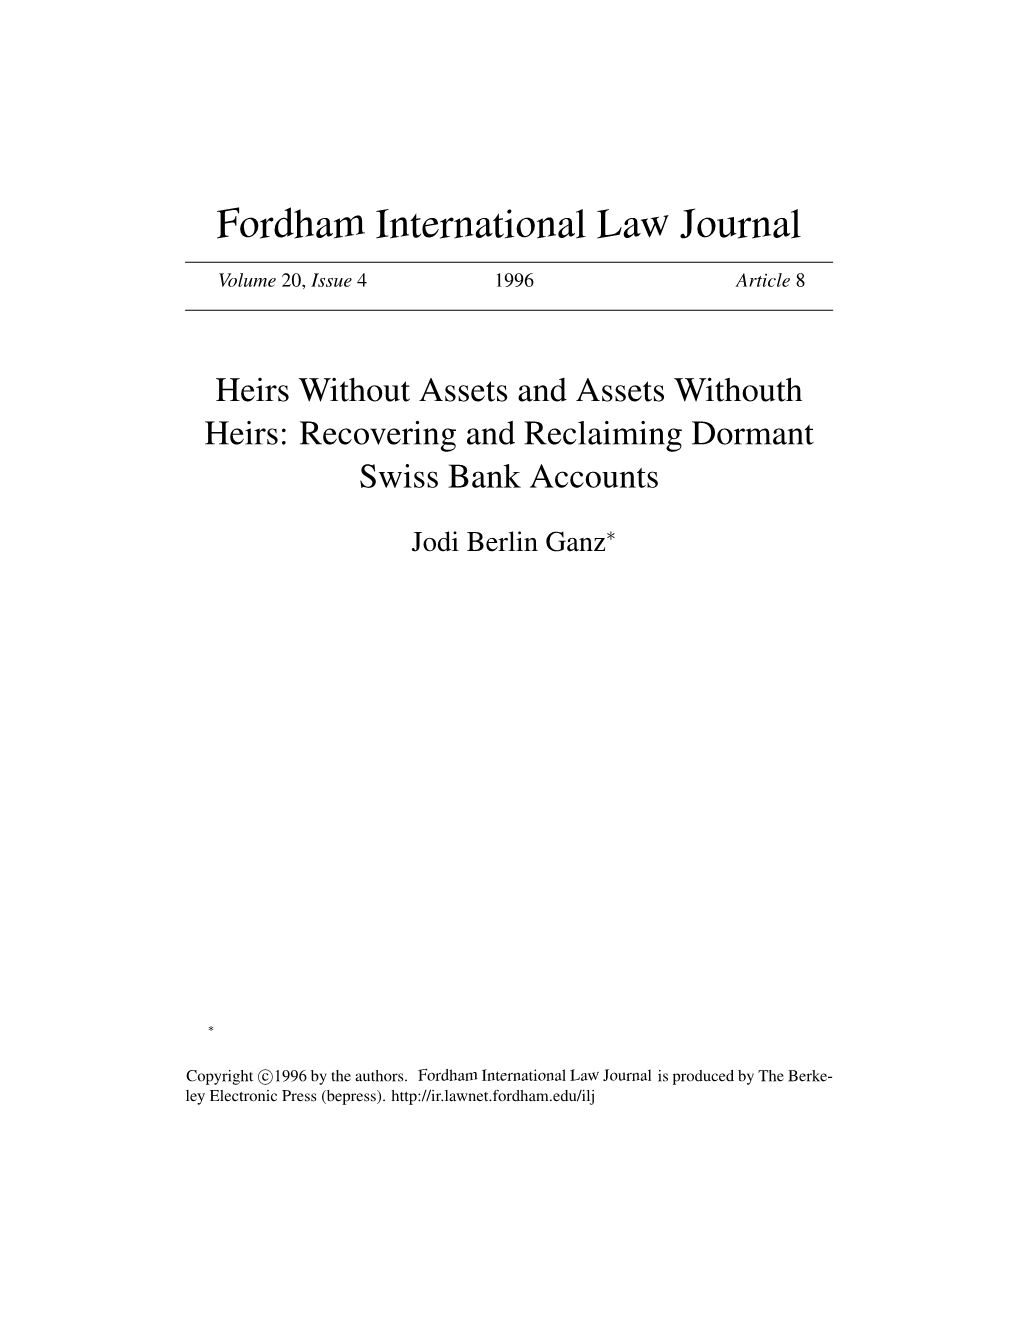 Heirs Without Assets and Assets Withouth Heirs: Recovering and Reclaiming Dormant Swiss Bank Accounts